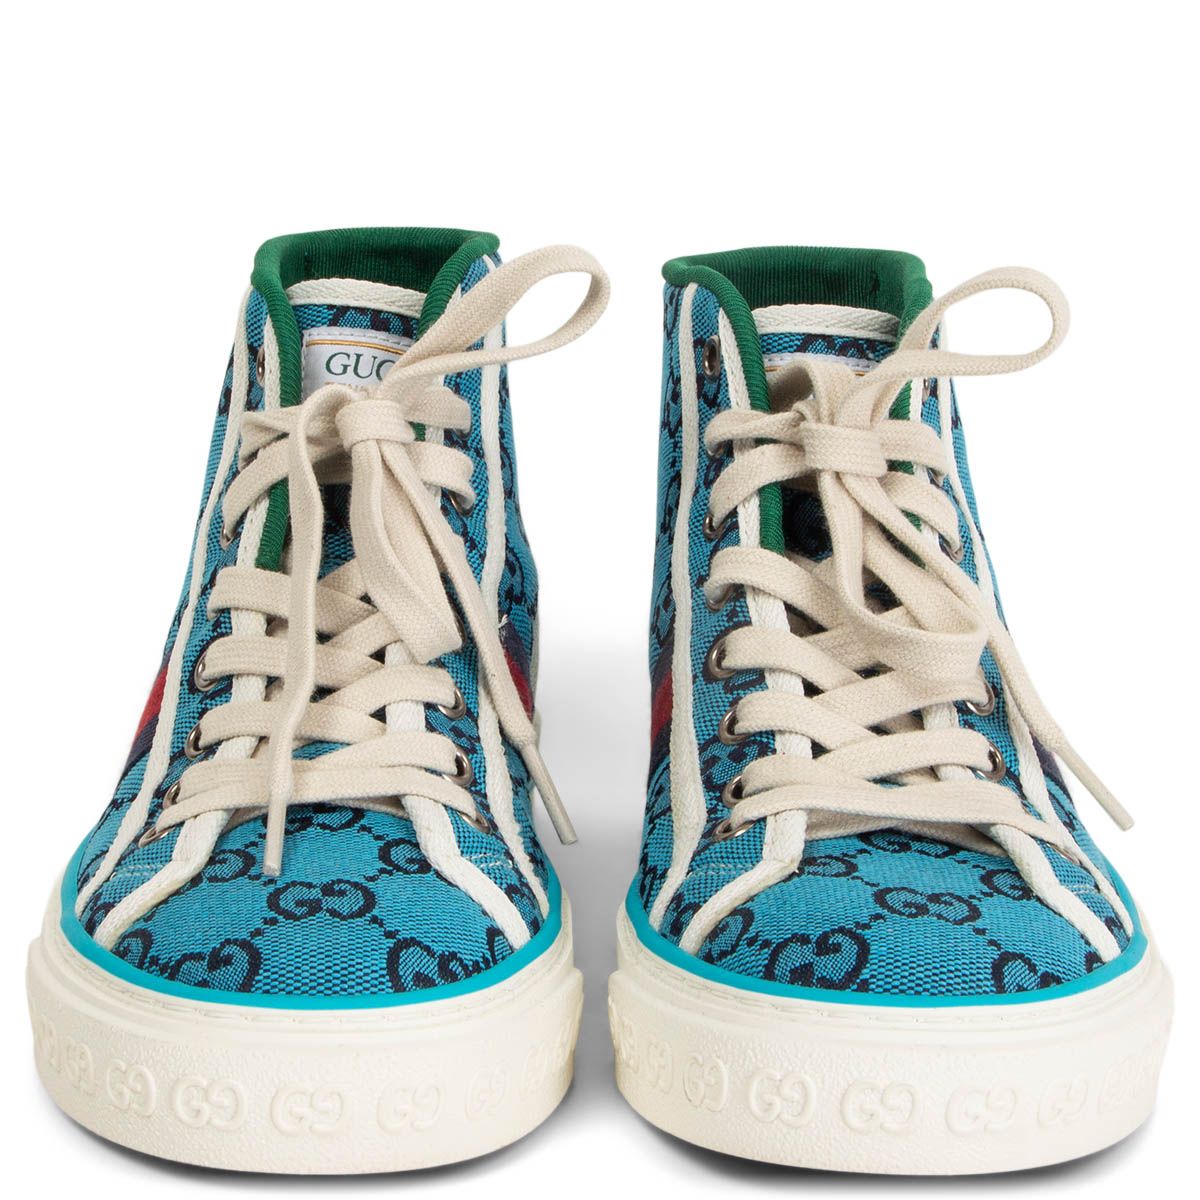 Gucci Tennis 1977 High Top Sneaker Turquoise